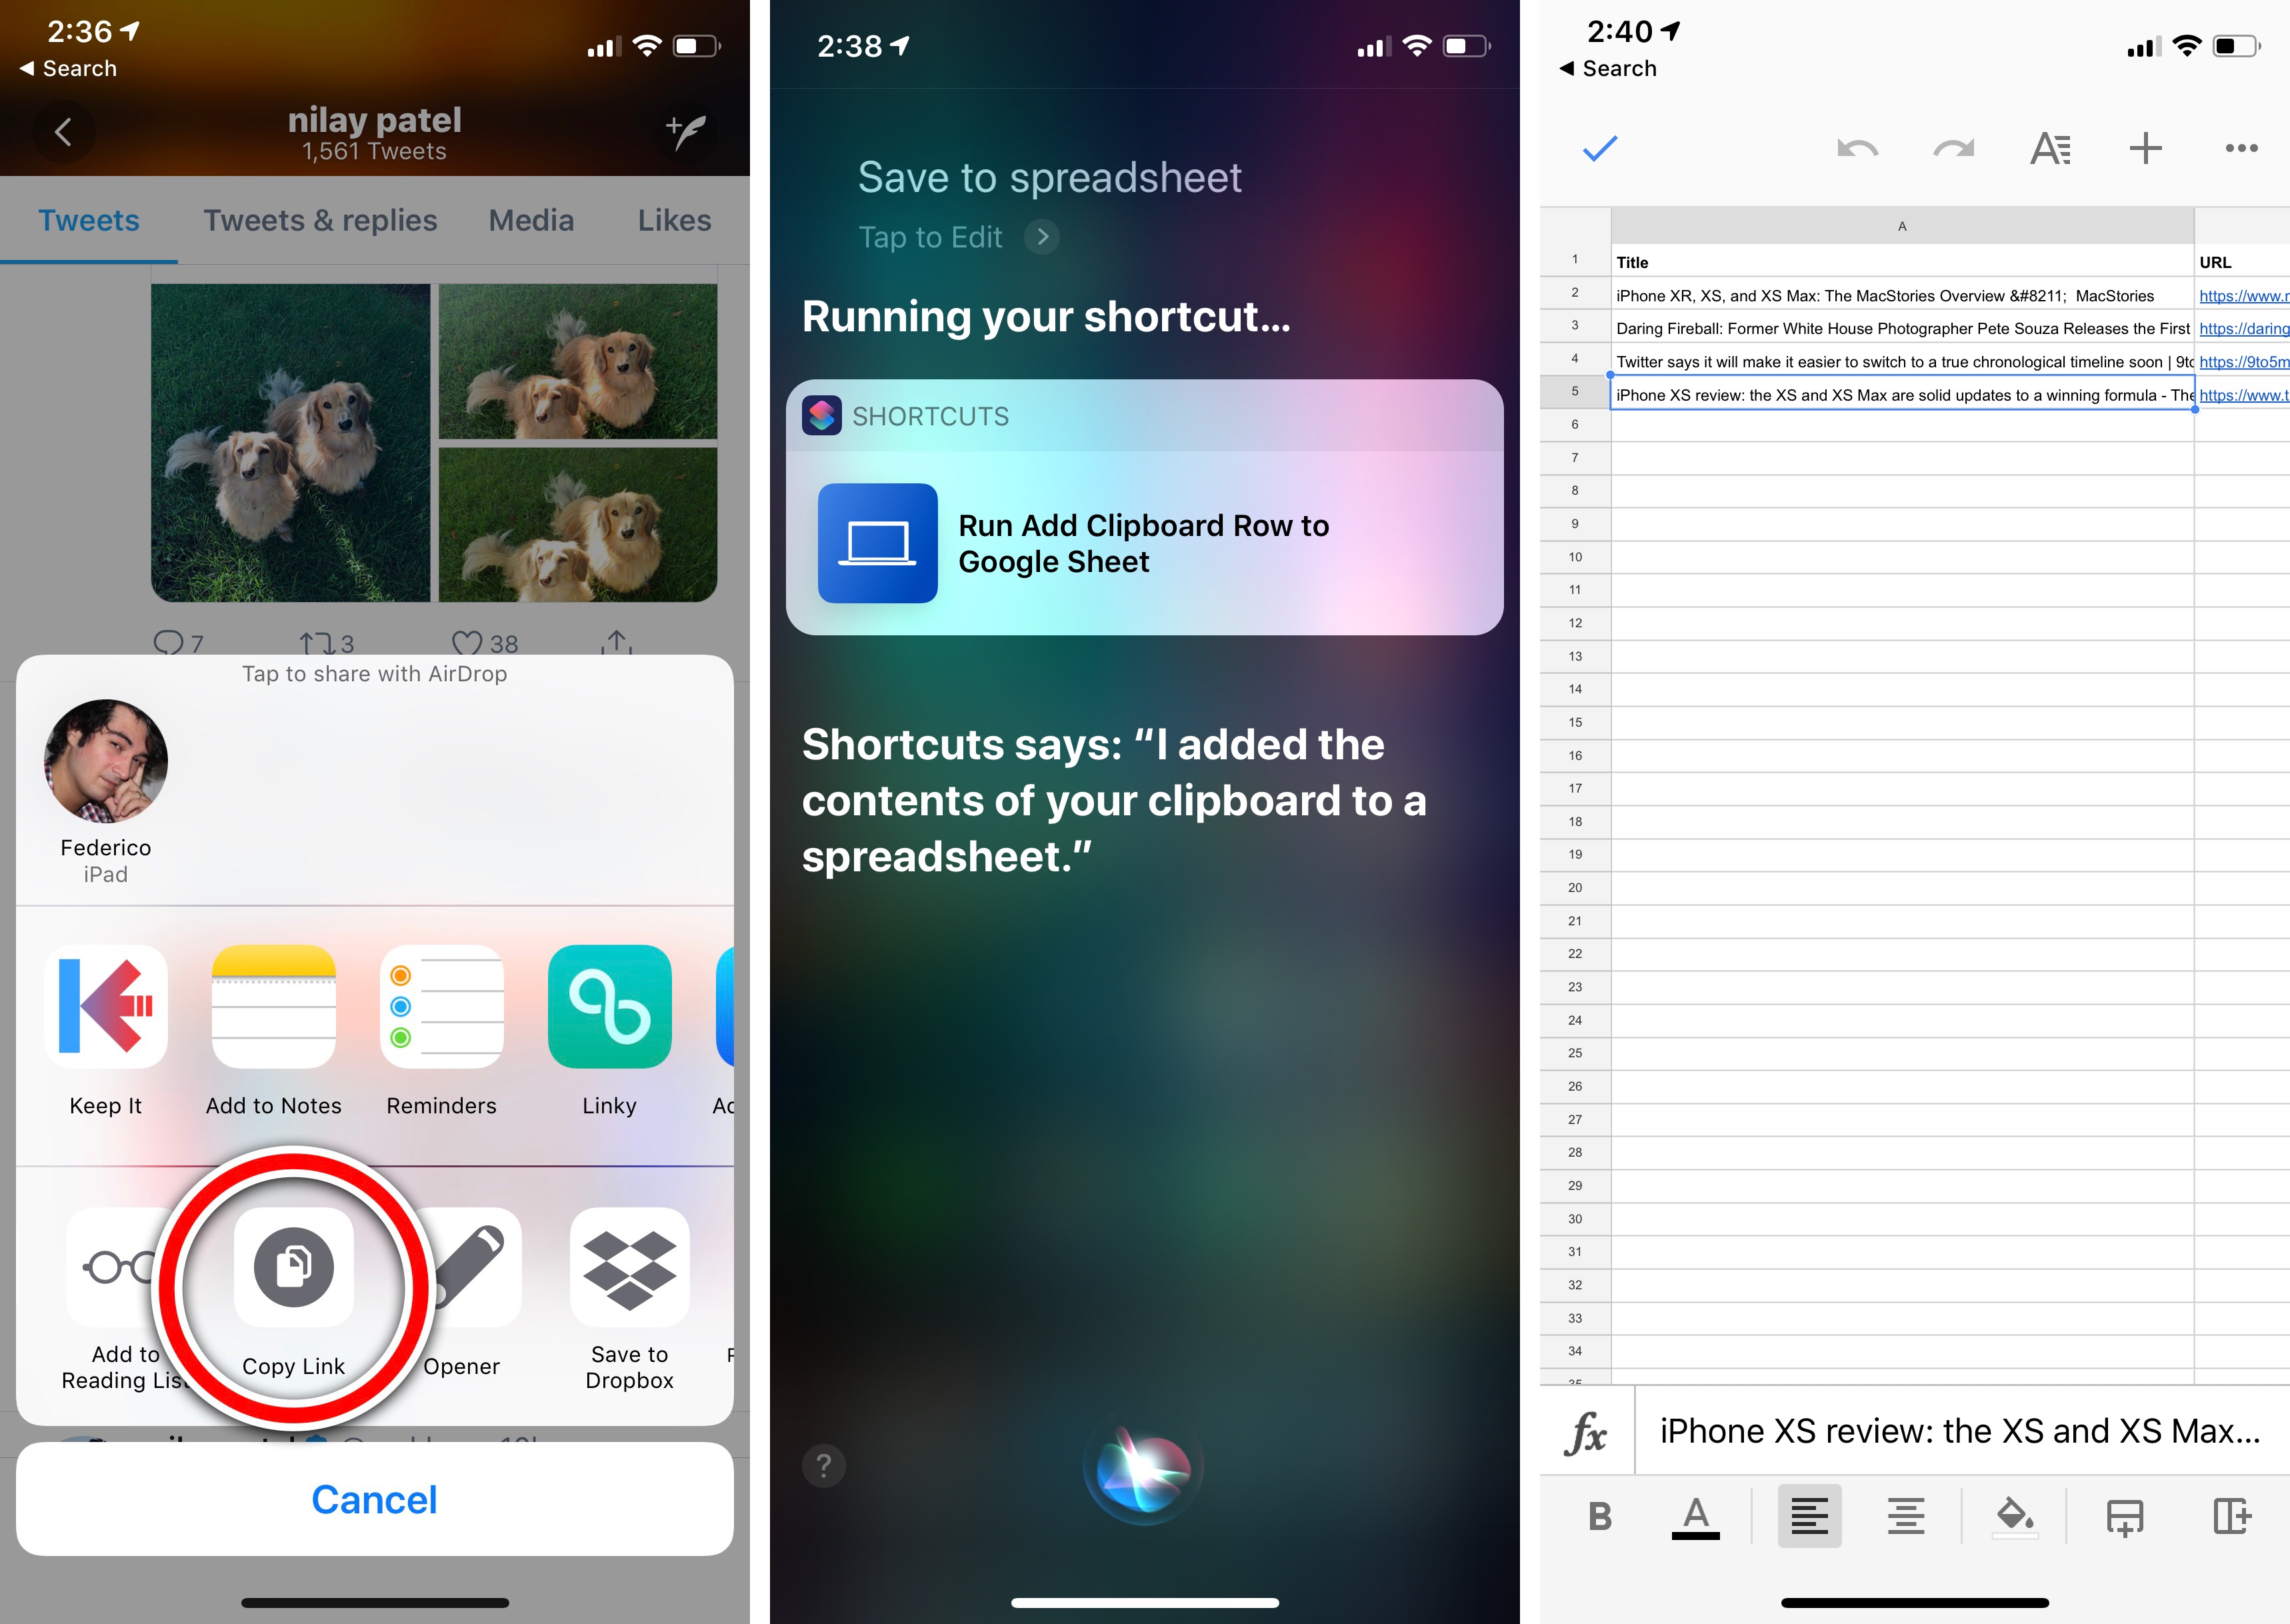 Saving a link from the iPhone's clipboard to a Google spreadsheet via Shortcuts and Siri.